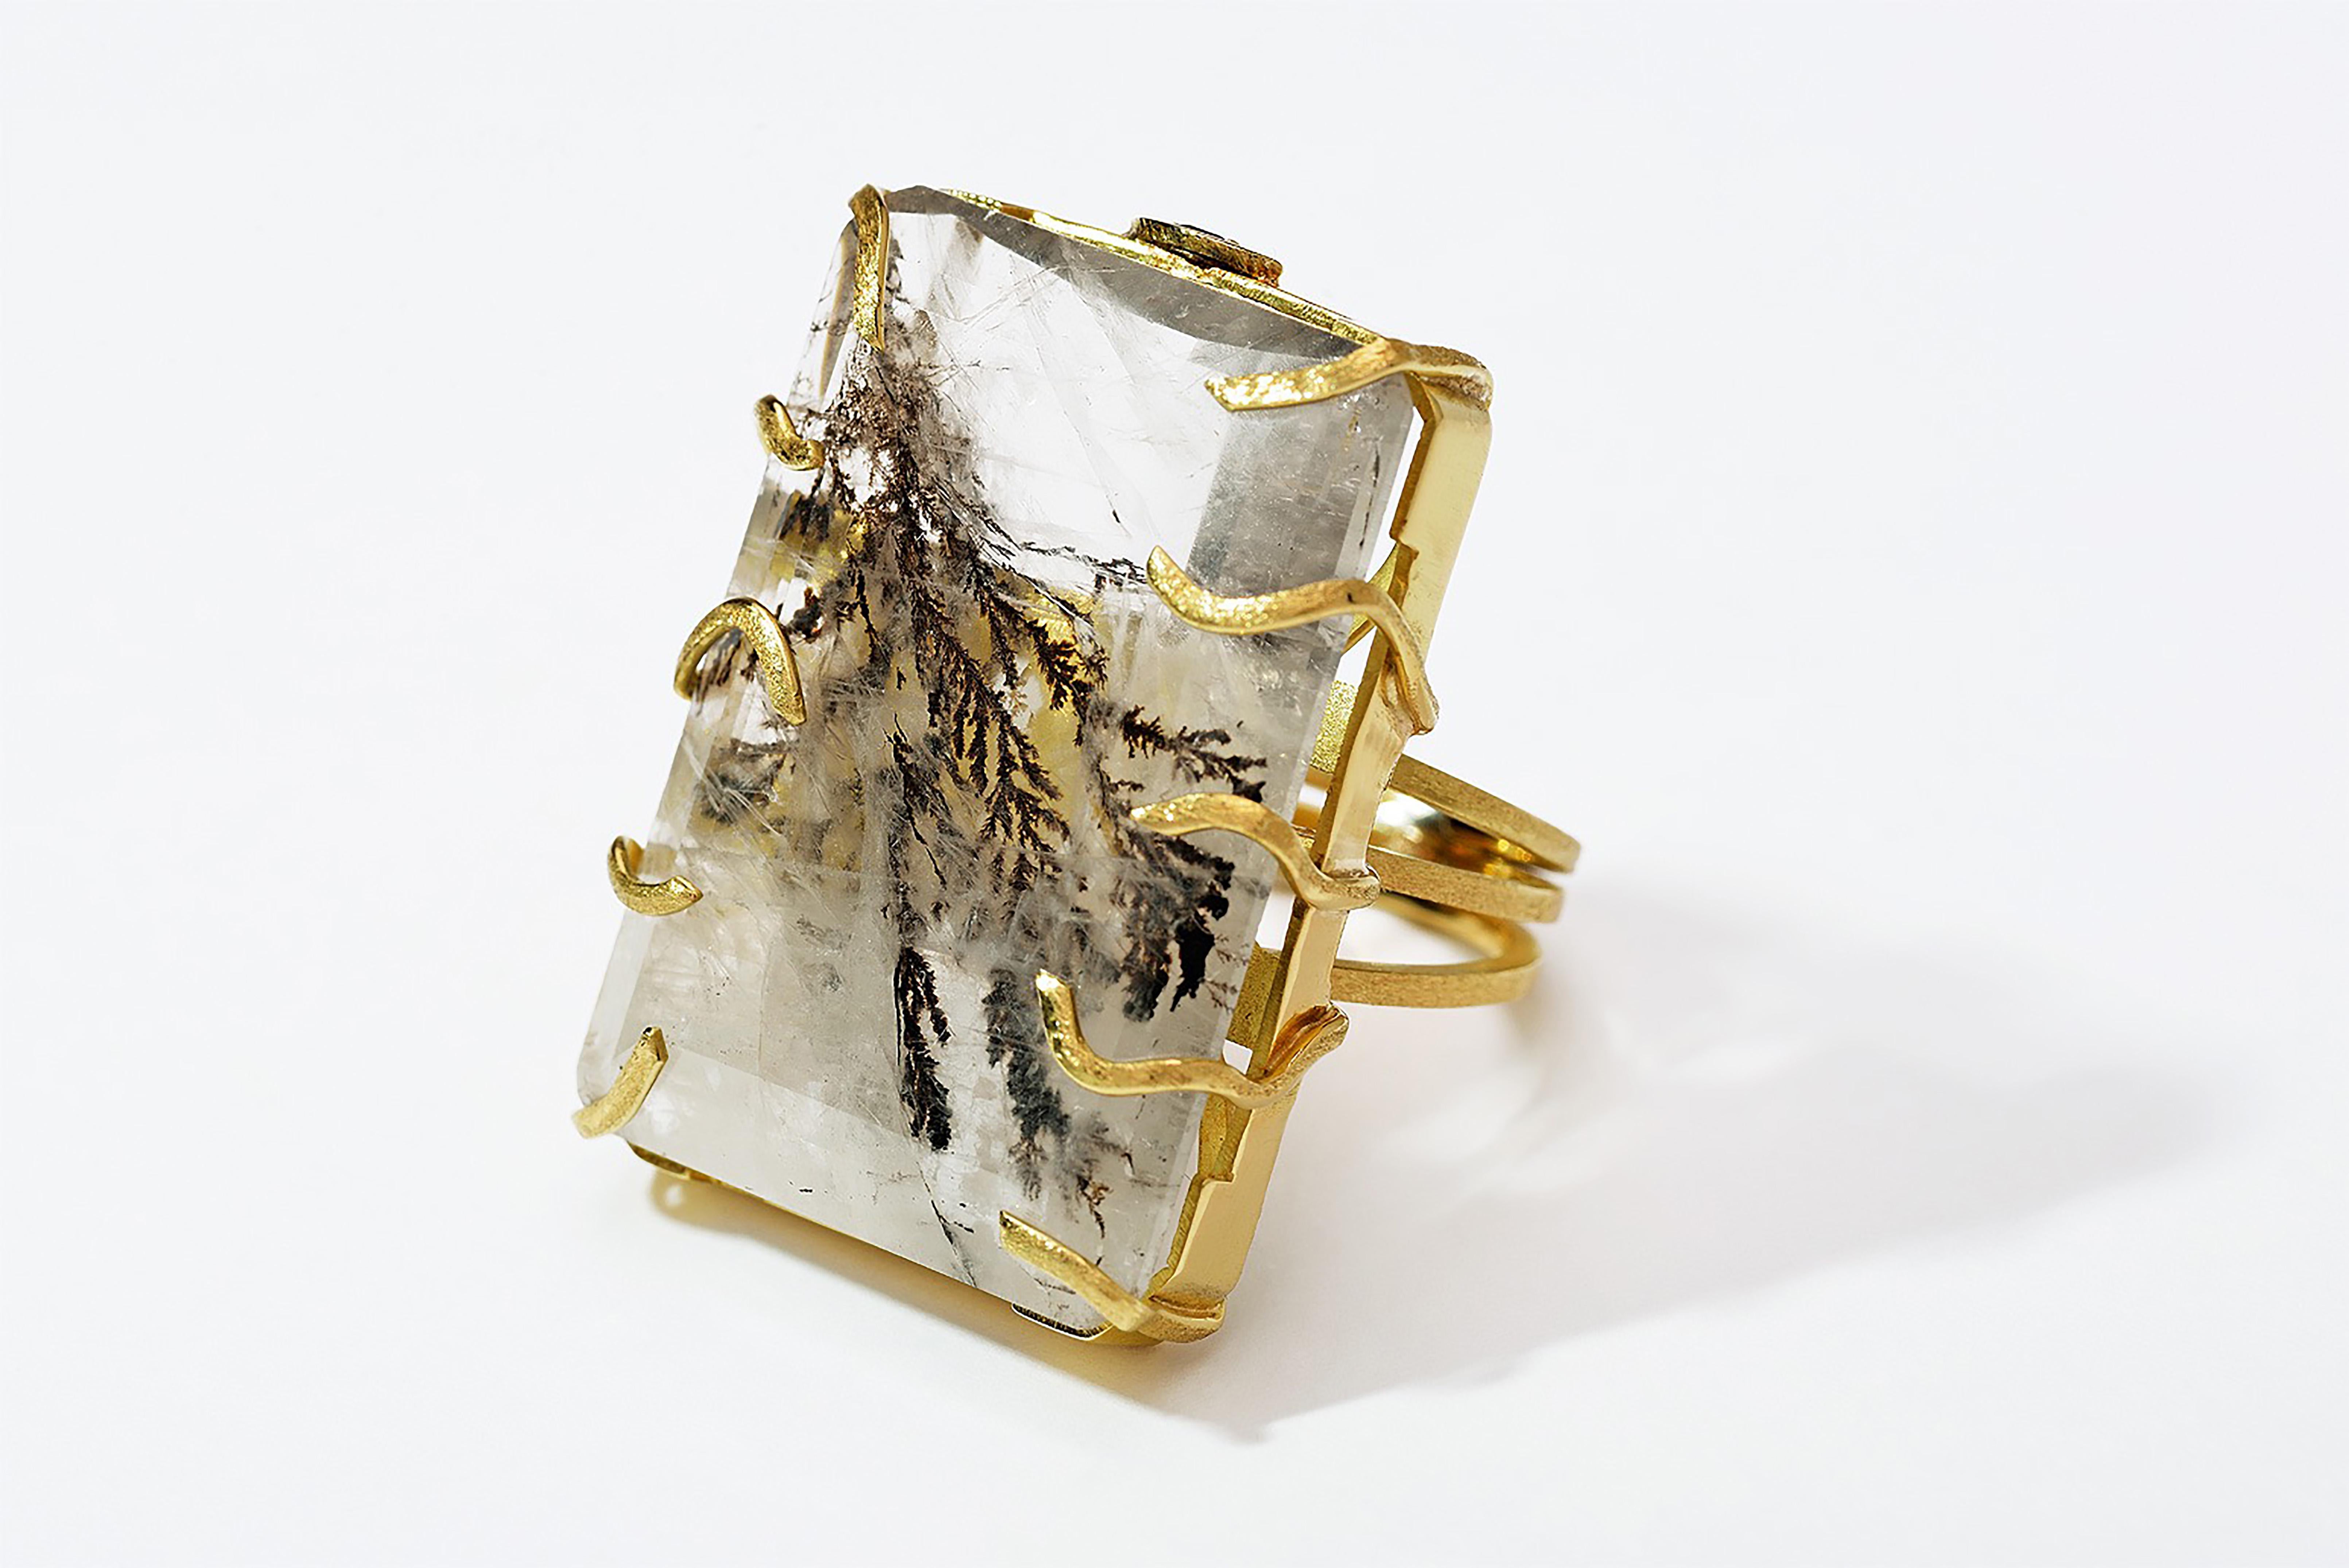 Dendrite, (from the Greek word: Tree) quartz is part of the quartz inclusion family. This beautiful variety of quartz contains fern-like inclusions of iron, manganese, hematite, and other metals.
Handcrafted in 18k yellow gold, the Auna ring is part